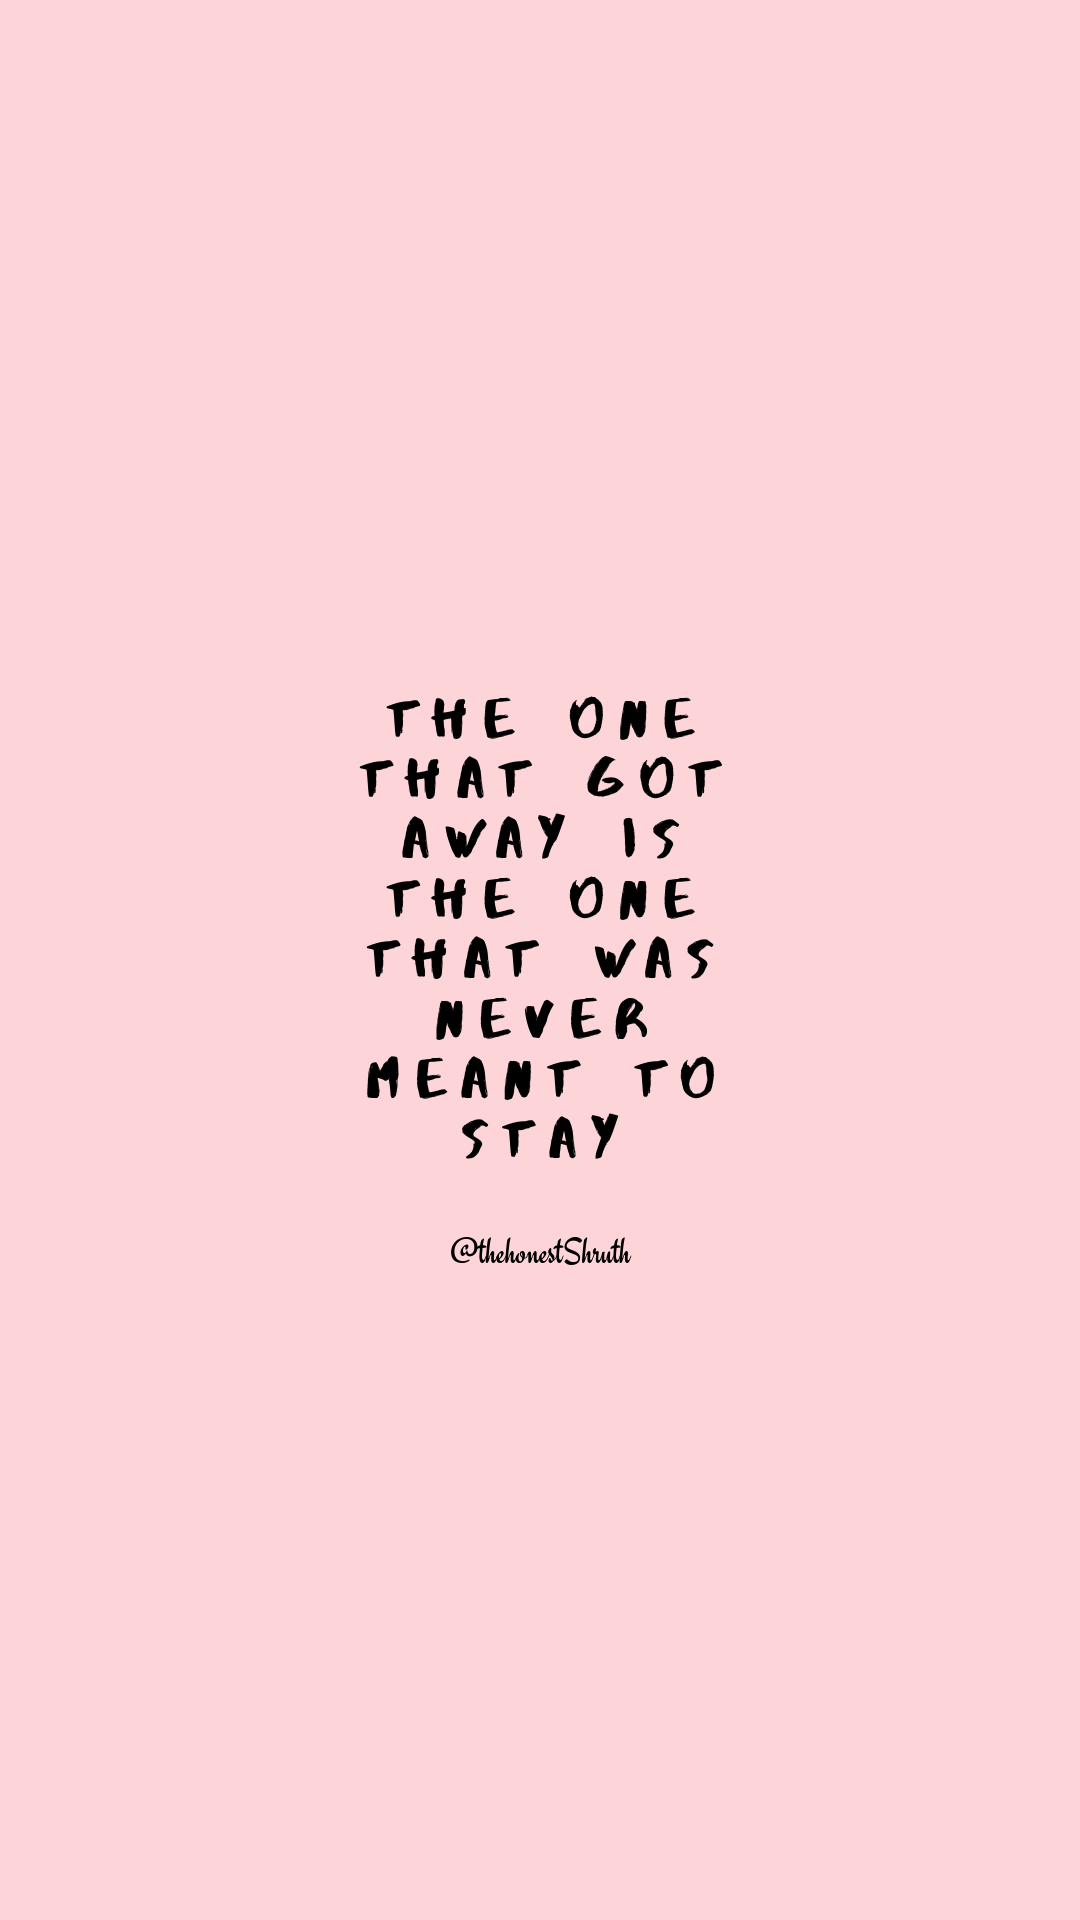 The One That Got Away Love Quotes Breakup Getting